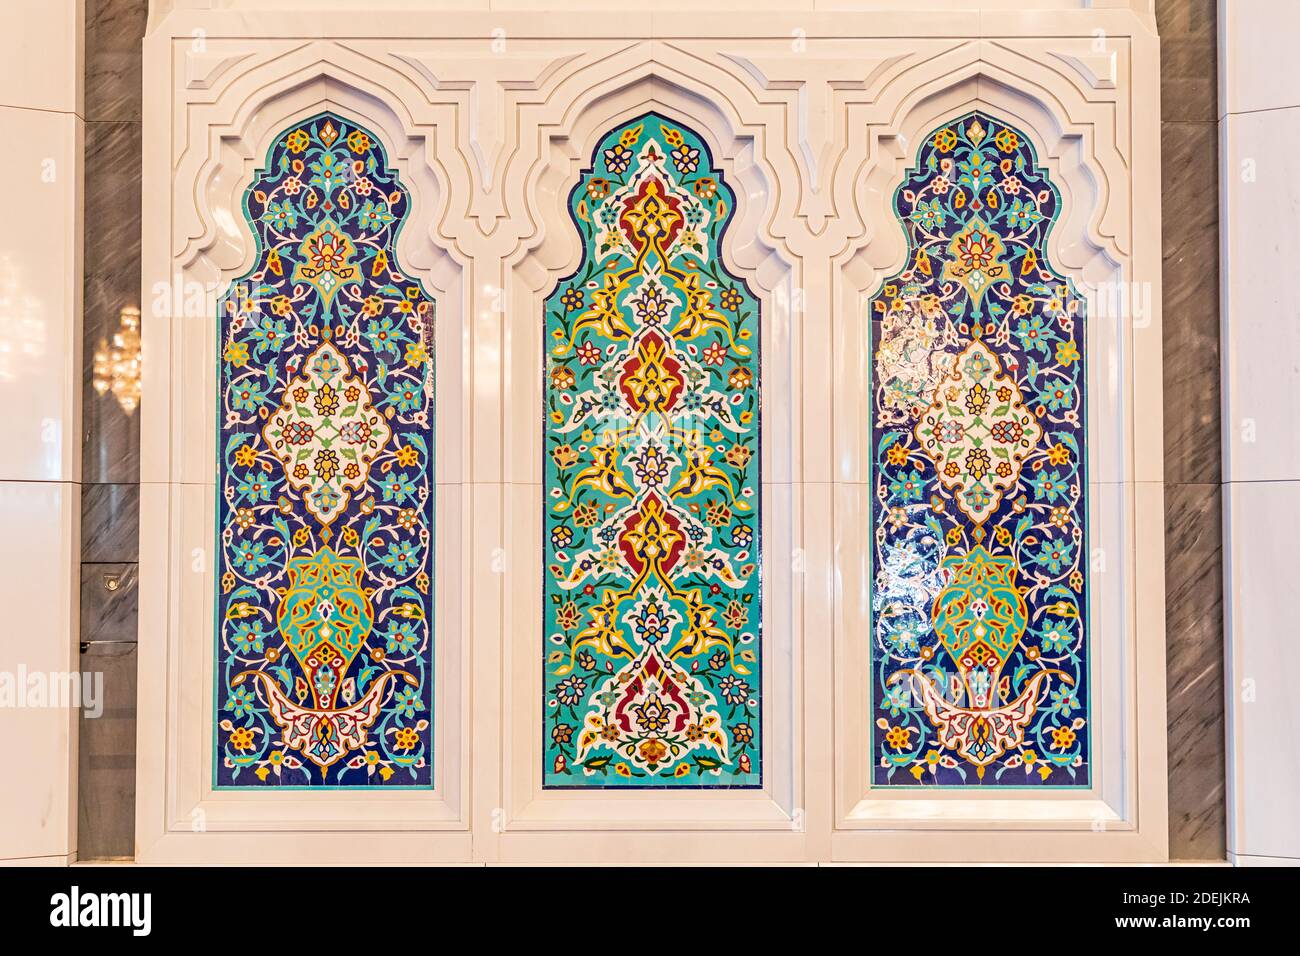 Middle East, Arabian Peninsula, Oman, Muscat. Decorative windows in the Sultan Qaboos Grand Mosque in Muscat. Stock Photo